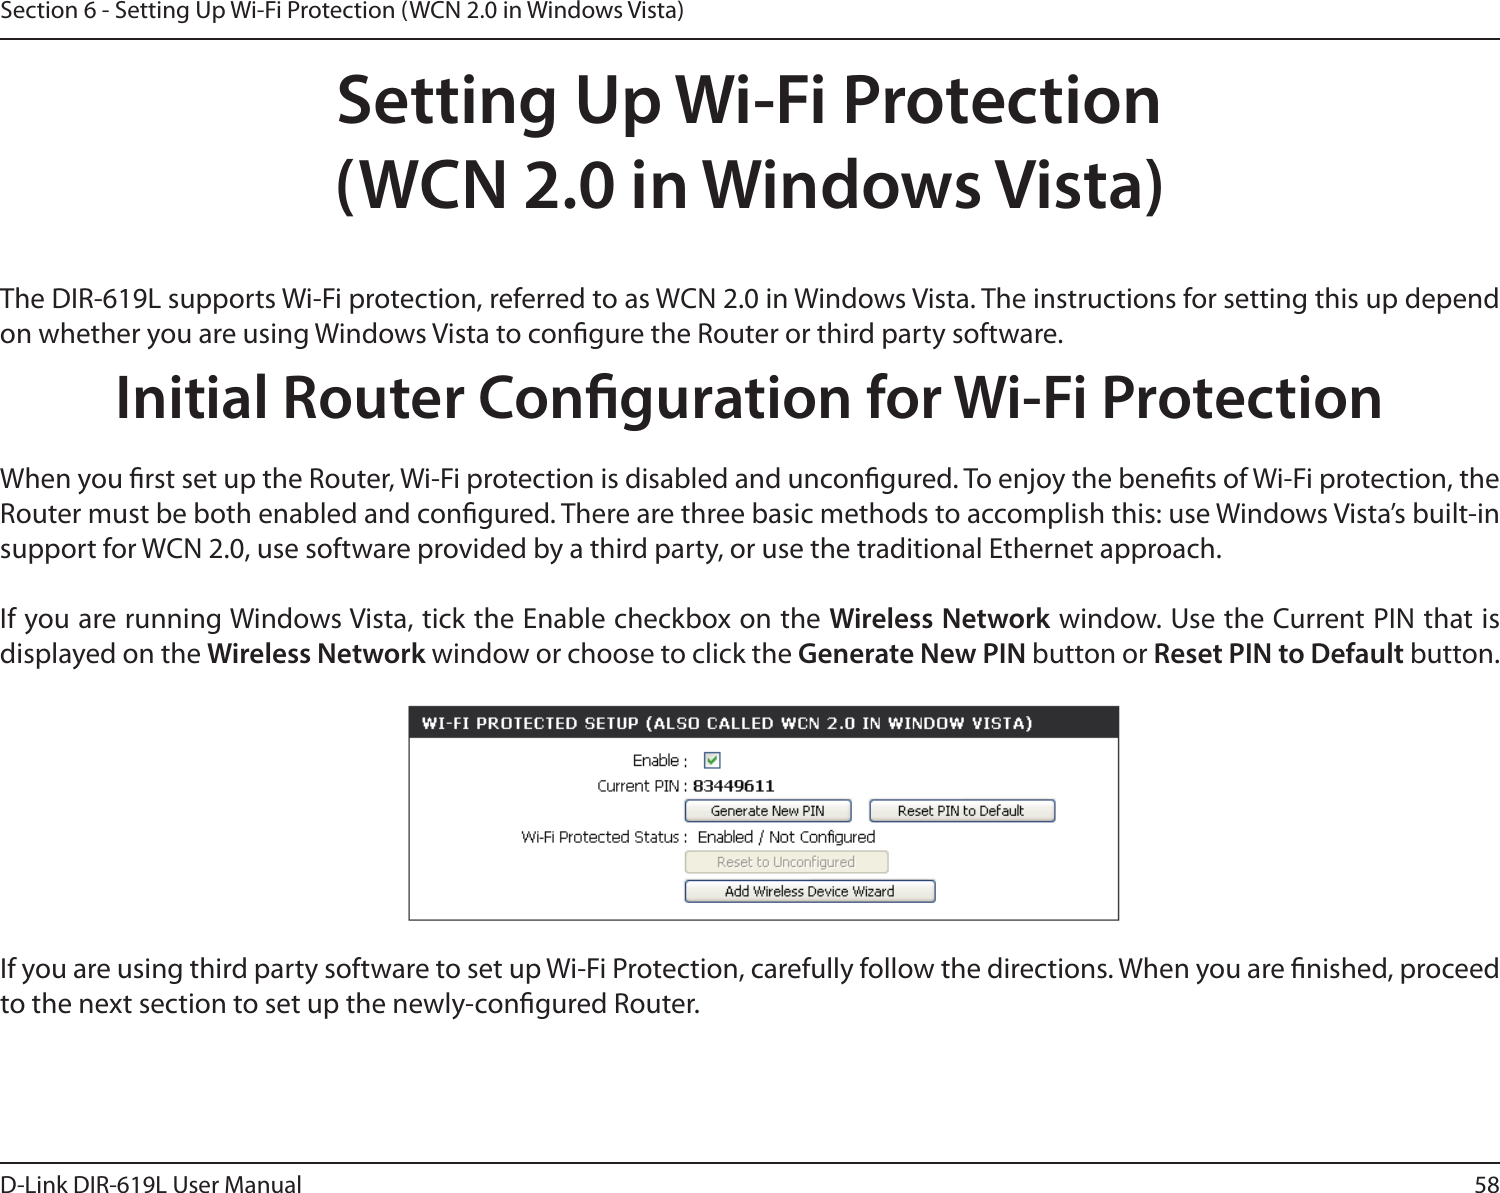 58D-Link DIR-619L User ManualSection 6 - Setting Up Wi-Fi Protection (WCN 2.0 in Windows Vista)Setting Up Wi-Fi Protection(WCN 2.0 in Windows Vista)The DIR-619L supports Wi-Fi protection, referred to as WCN 2.0 in Windows Vista. The instructions for setting this up depend on whether you are using Windows Vista to congure the Router or third party software.        Initial Router Conguration for Wi-Fi ProtectionWhen you rst set up the Router, Wi-Fi protection is disabled and uncongured. To enjoy the benets of Wi-Fi protection, the Router must be both enabled and congured. There are three basic methods to accomplish this: use Windows Vista’s built-in support for WCN 2.0, use software provided by a third party, or use the traditional Ethernet approach. If you are running Windows Vista, tick the Enable checkbox on the Wireless Network window. Use the Current PIN that is displayed on the Wireless Network window or choose to click the Generate New PIN button or Reset PIN to Default button. If you are using third party software to set up Wi-Fi Protection, carefully follow the directions. When you are nished, proceed to the next section to set up the newly-congured Router. 